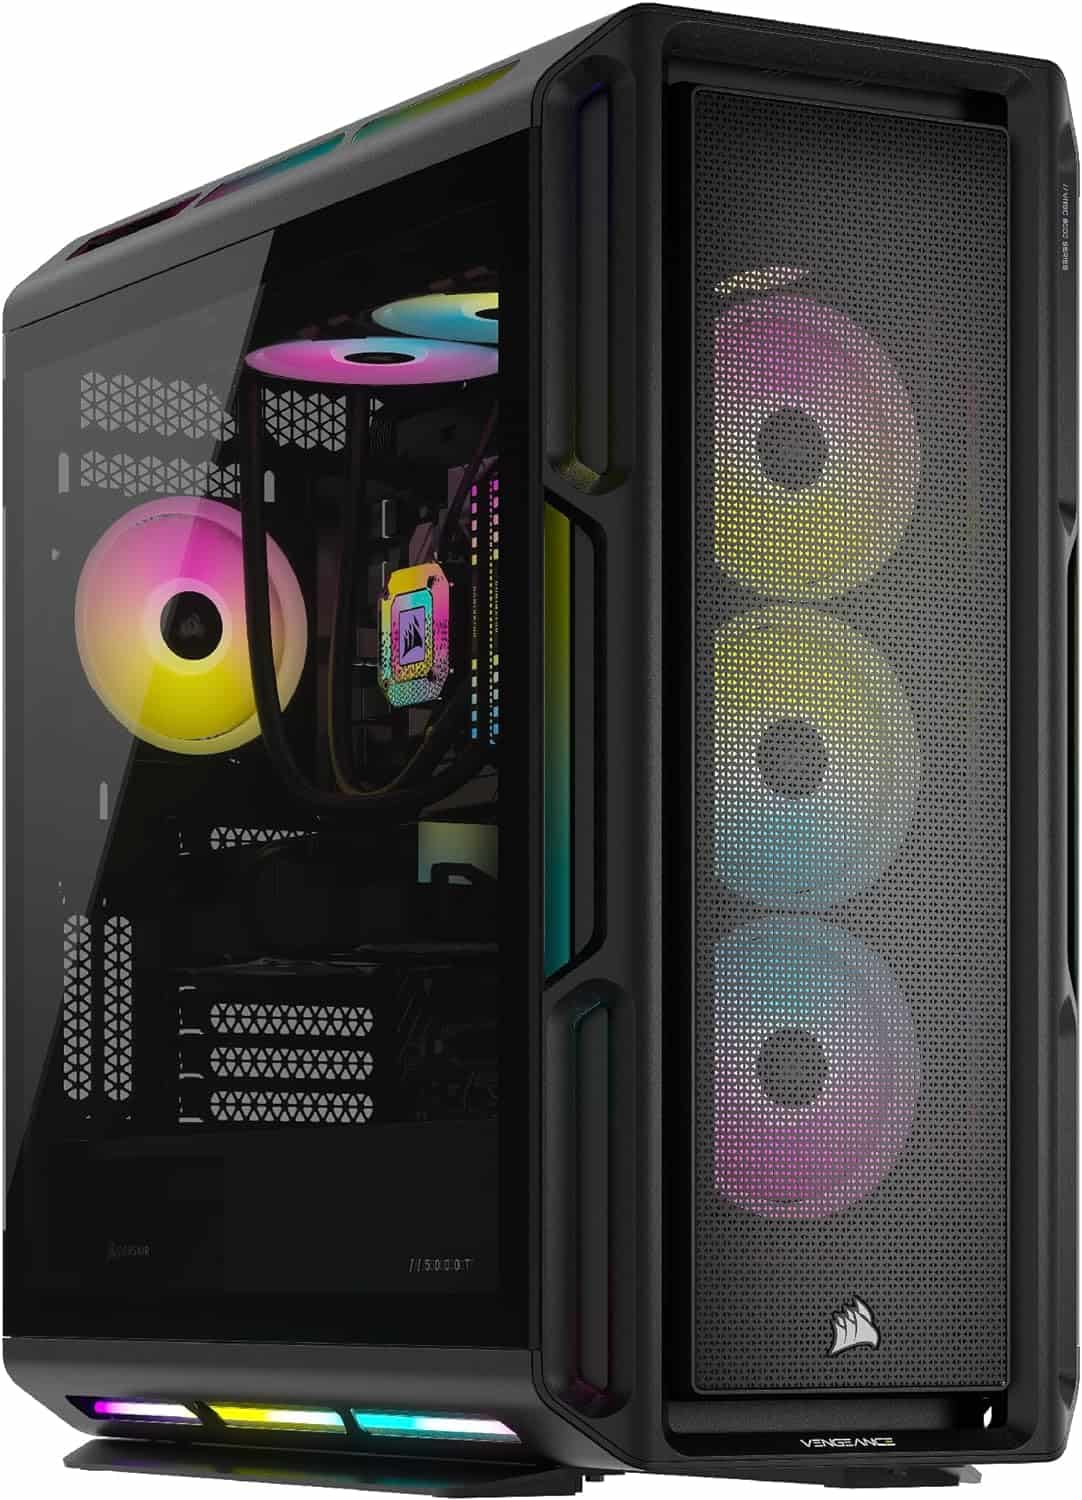 Gaming PC tower from the Corsair Vengeance i8100 Series with transparent side panel and RGB lighting.